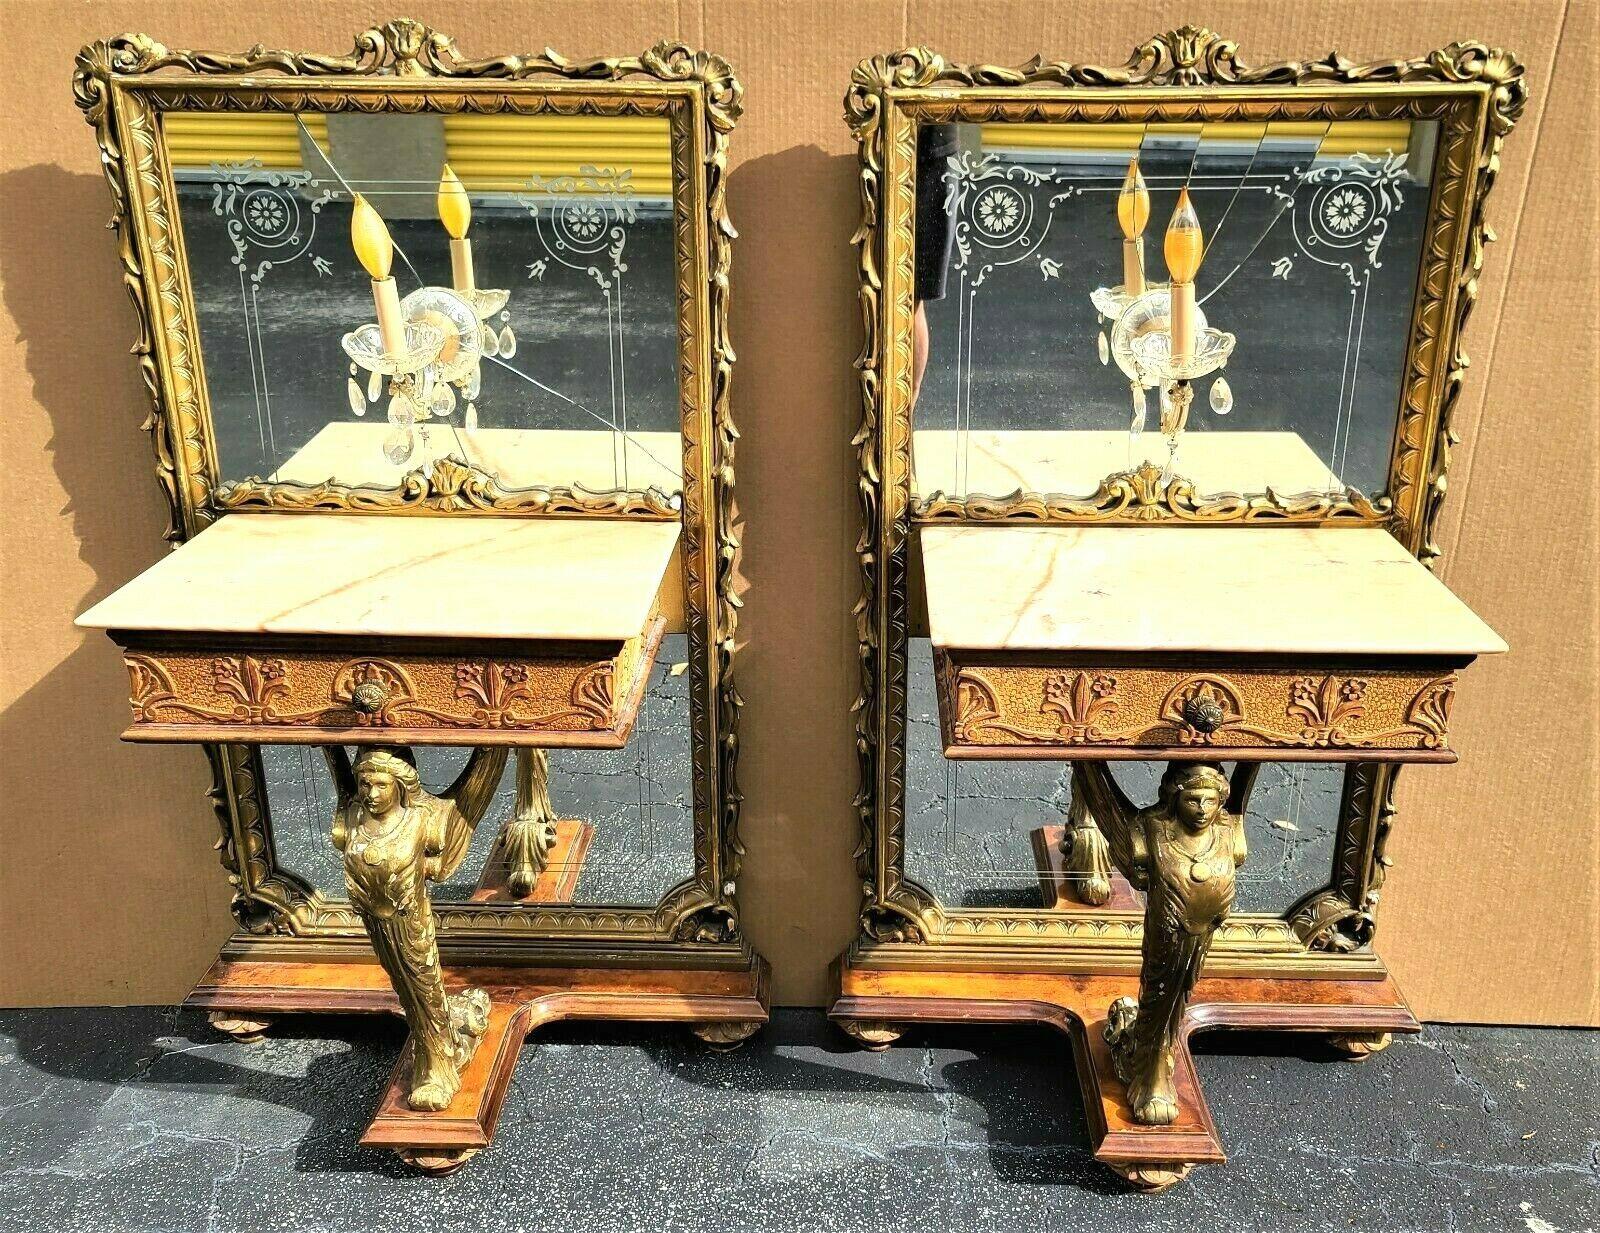 Offering one of our recent palm beach estate fine furniture acquisitions of a
Pair of antique c 1900 Italian neoclassical burl mahogany mirrored marble top nightstands with electric crystal sconces
These are very special and unique pieces. All